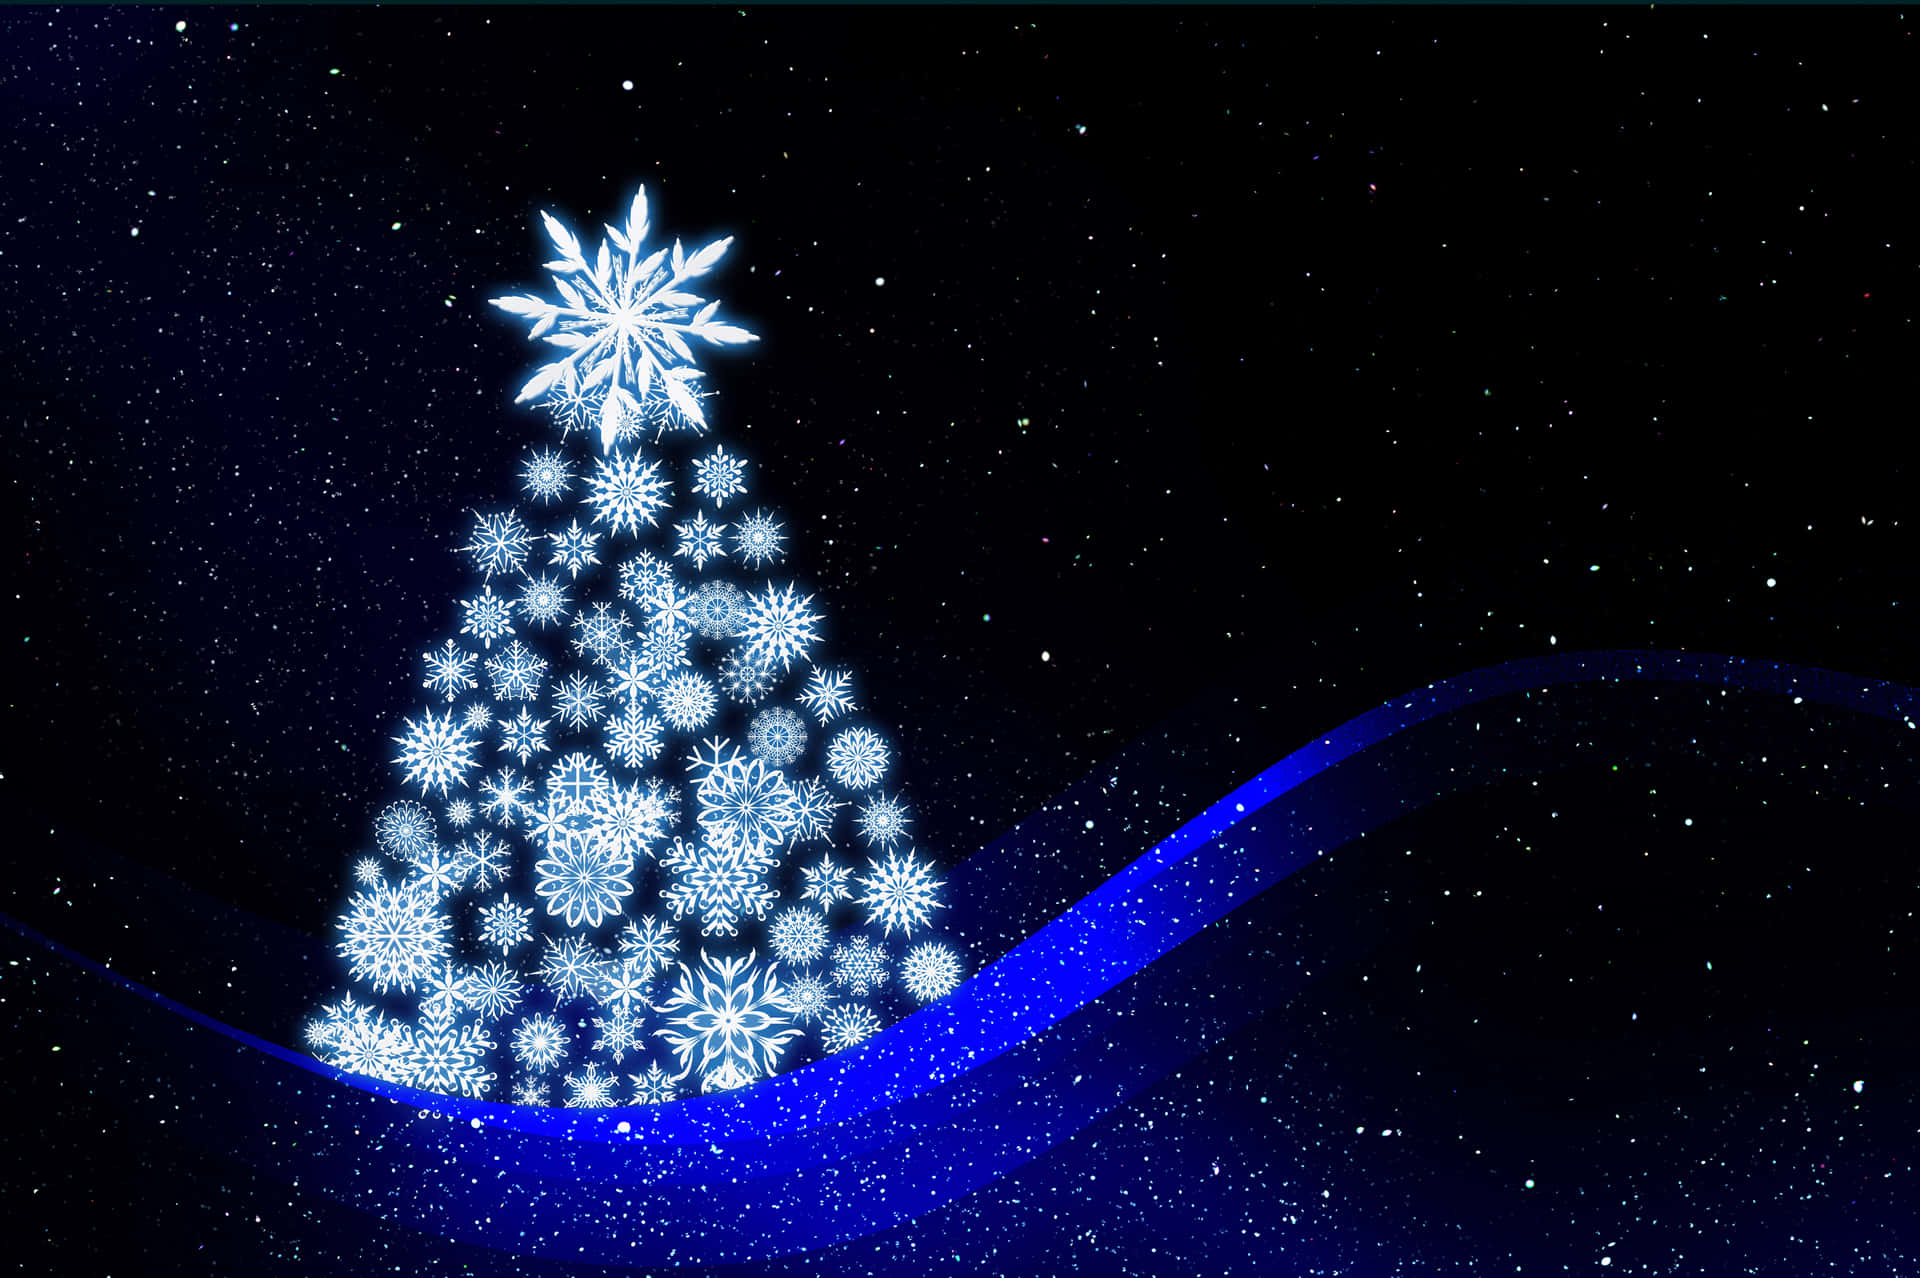 A Blue Christmas Tree With Snowflakes On A Black Background Wallpaper